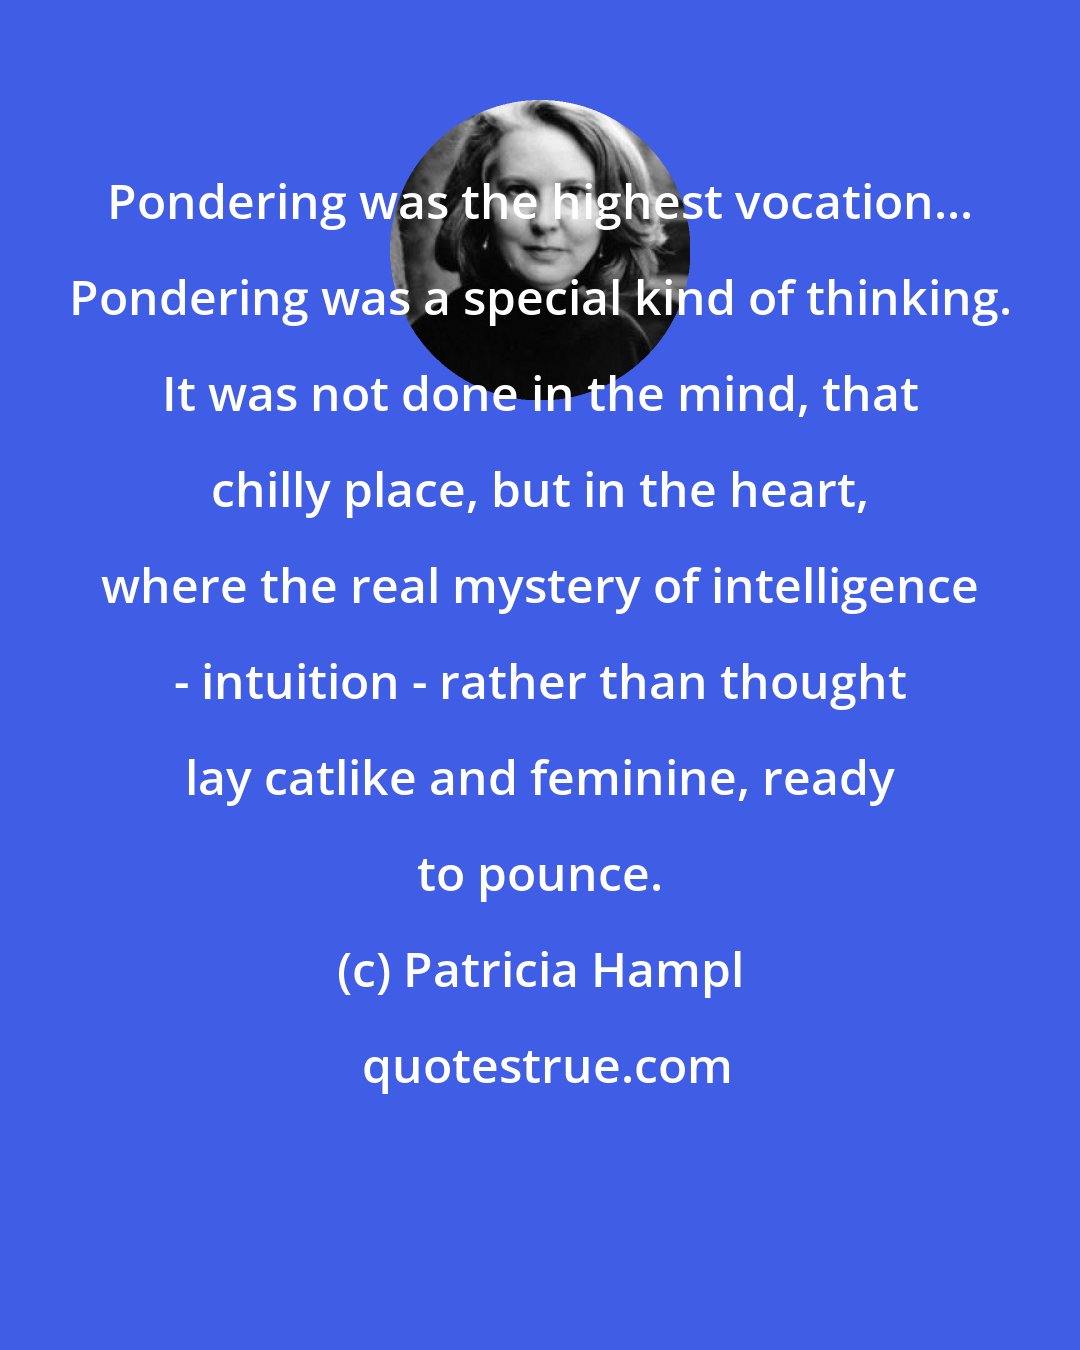 Patricia Hampl: Pondering was the highest vocation... Pondering was a special kind of thinking. It was not done in the mind, that chilly place, but in the heart, where the real mystery of intelligence - intuition - rather than thought lay catlike and feminine, ready to pounce.